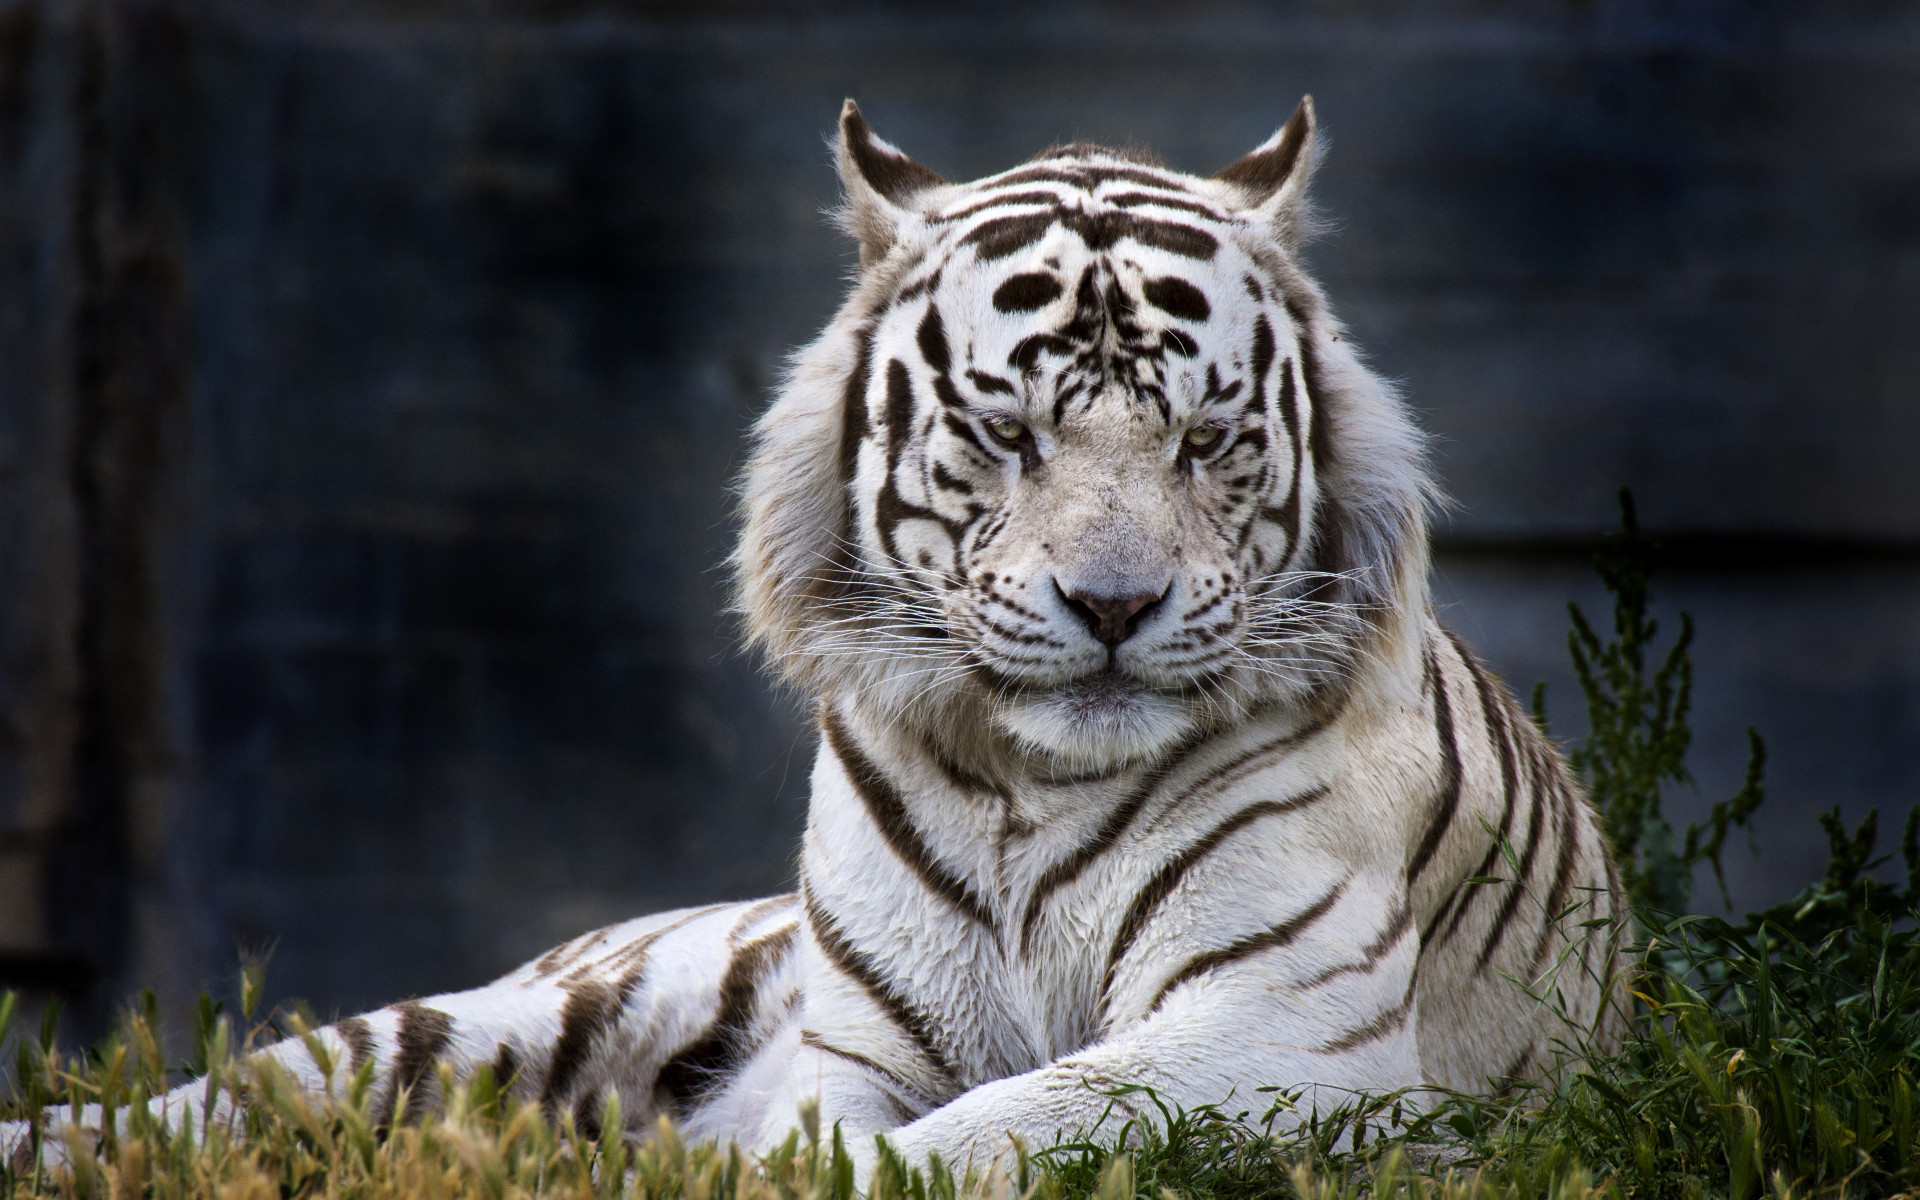 The white tiger from Madrid Zoo wallpaper 1920x1200